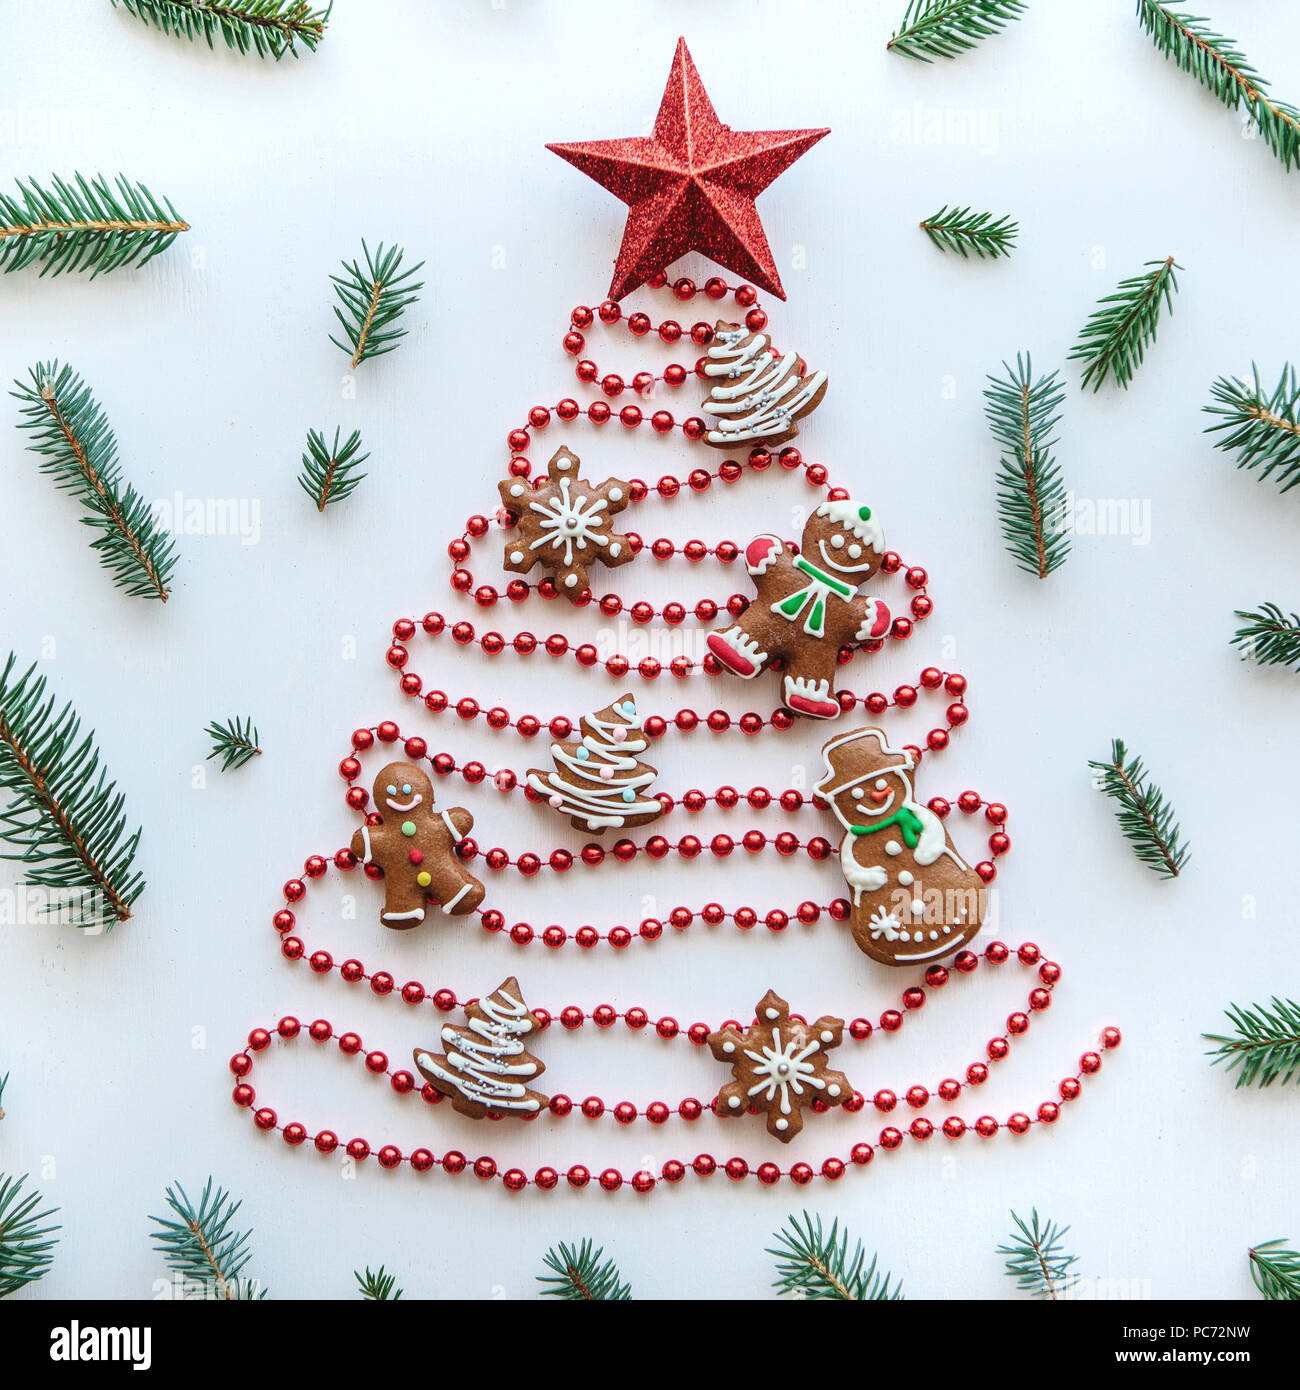 Creative idea for Christmas or New Year theme. A Christmas tree made of beads decorated with traditional gingerbread and a star on top. Celebratory concept. Stock Photo